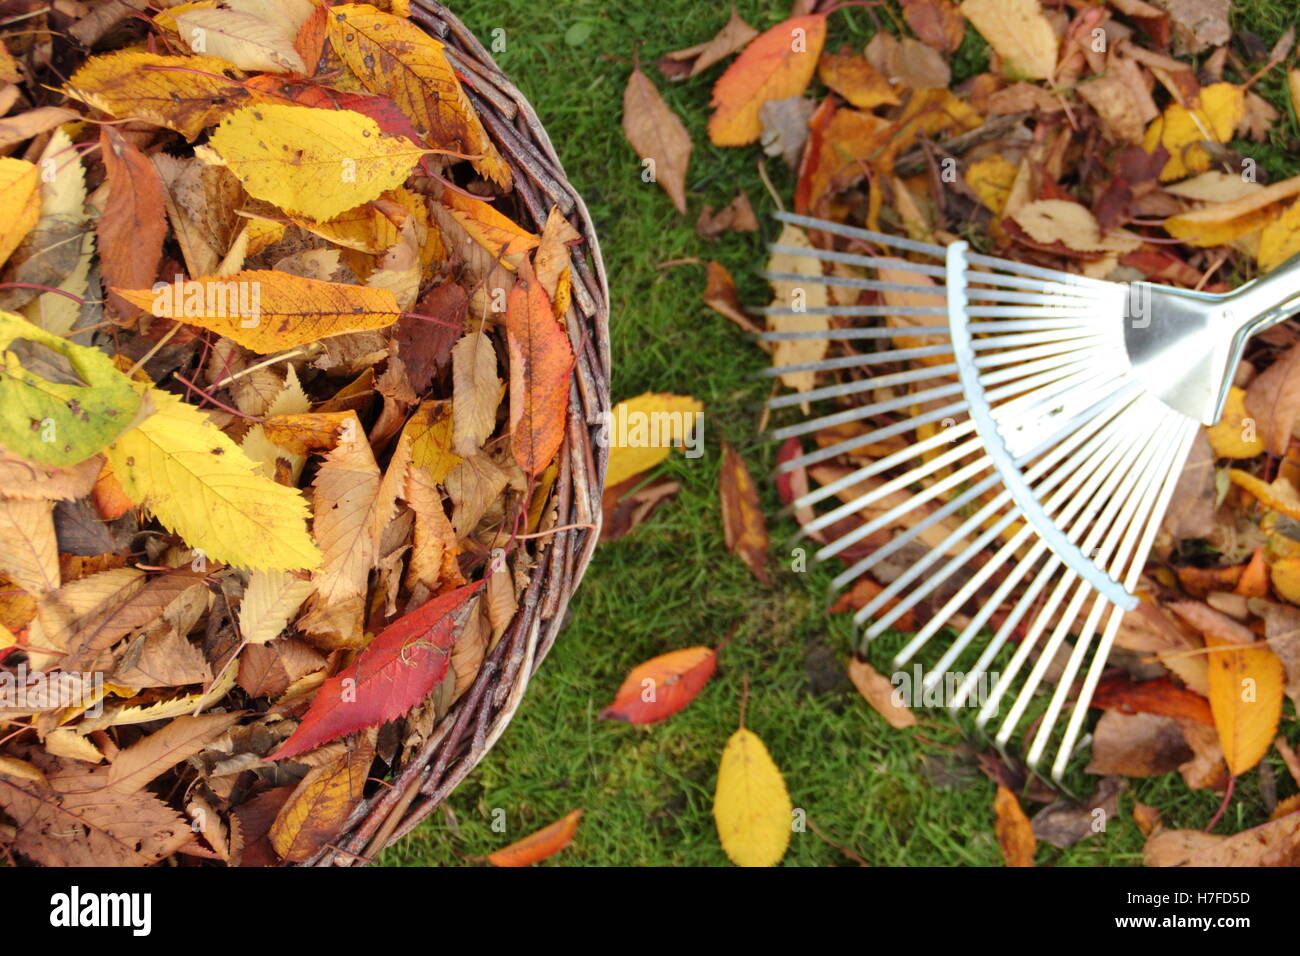 Collecting autumn leaves from a garden lawn for composting to make leaf mould mulch Stock Photo